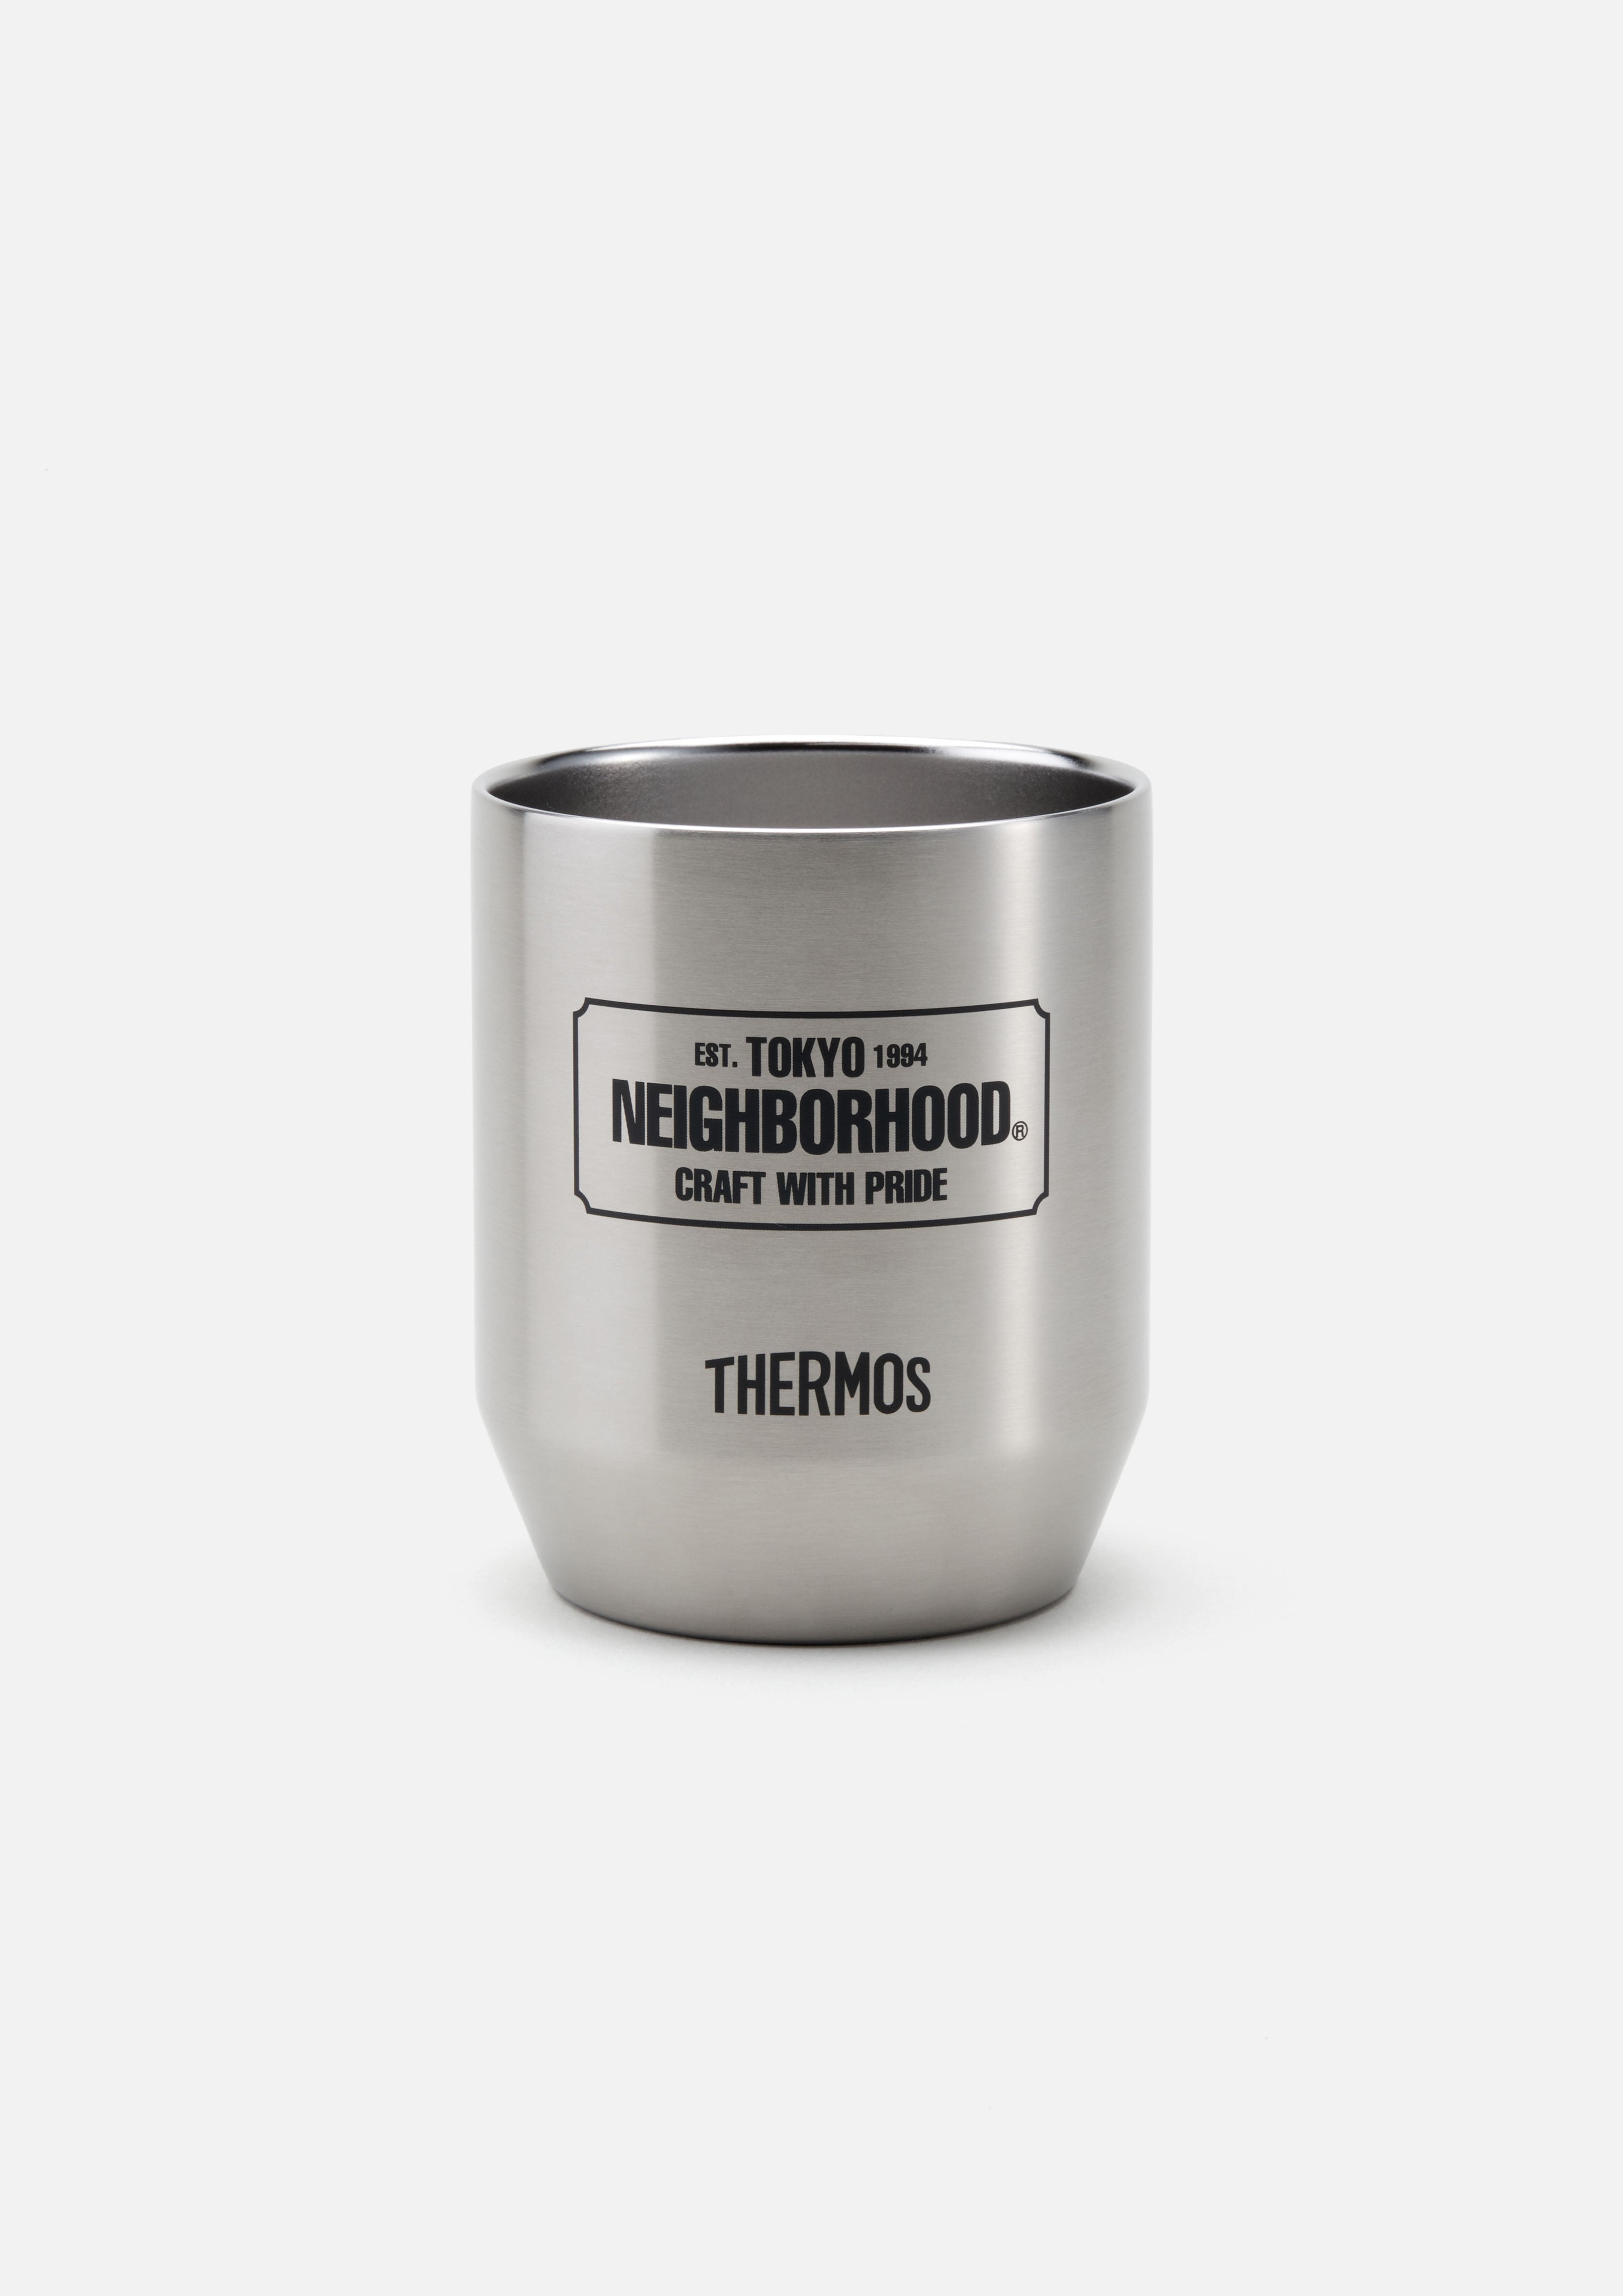 NH X THERMOS . JDH-360P CUP SET